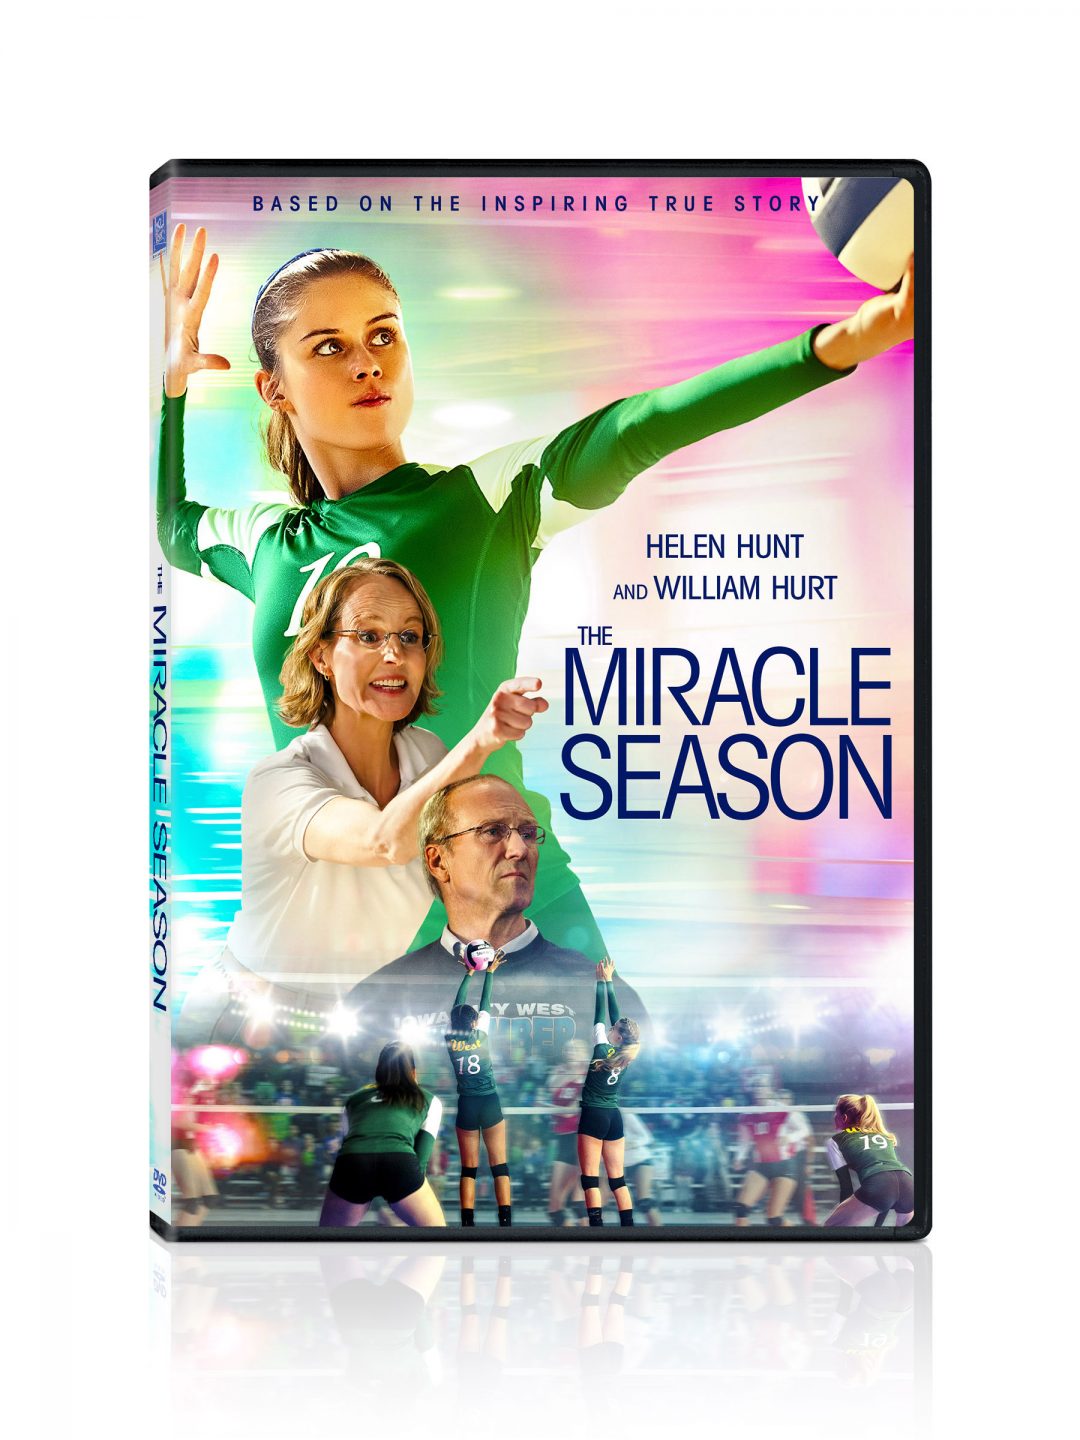 The Miracle Season DVD cover (20th Century Fox Home Entertainment)